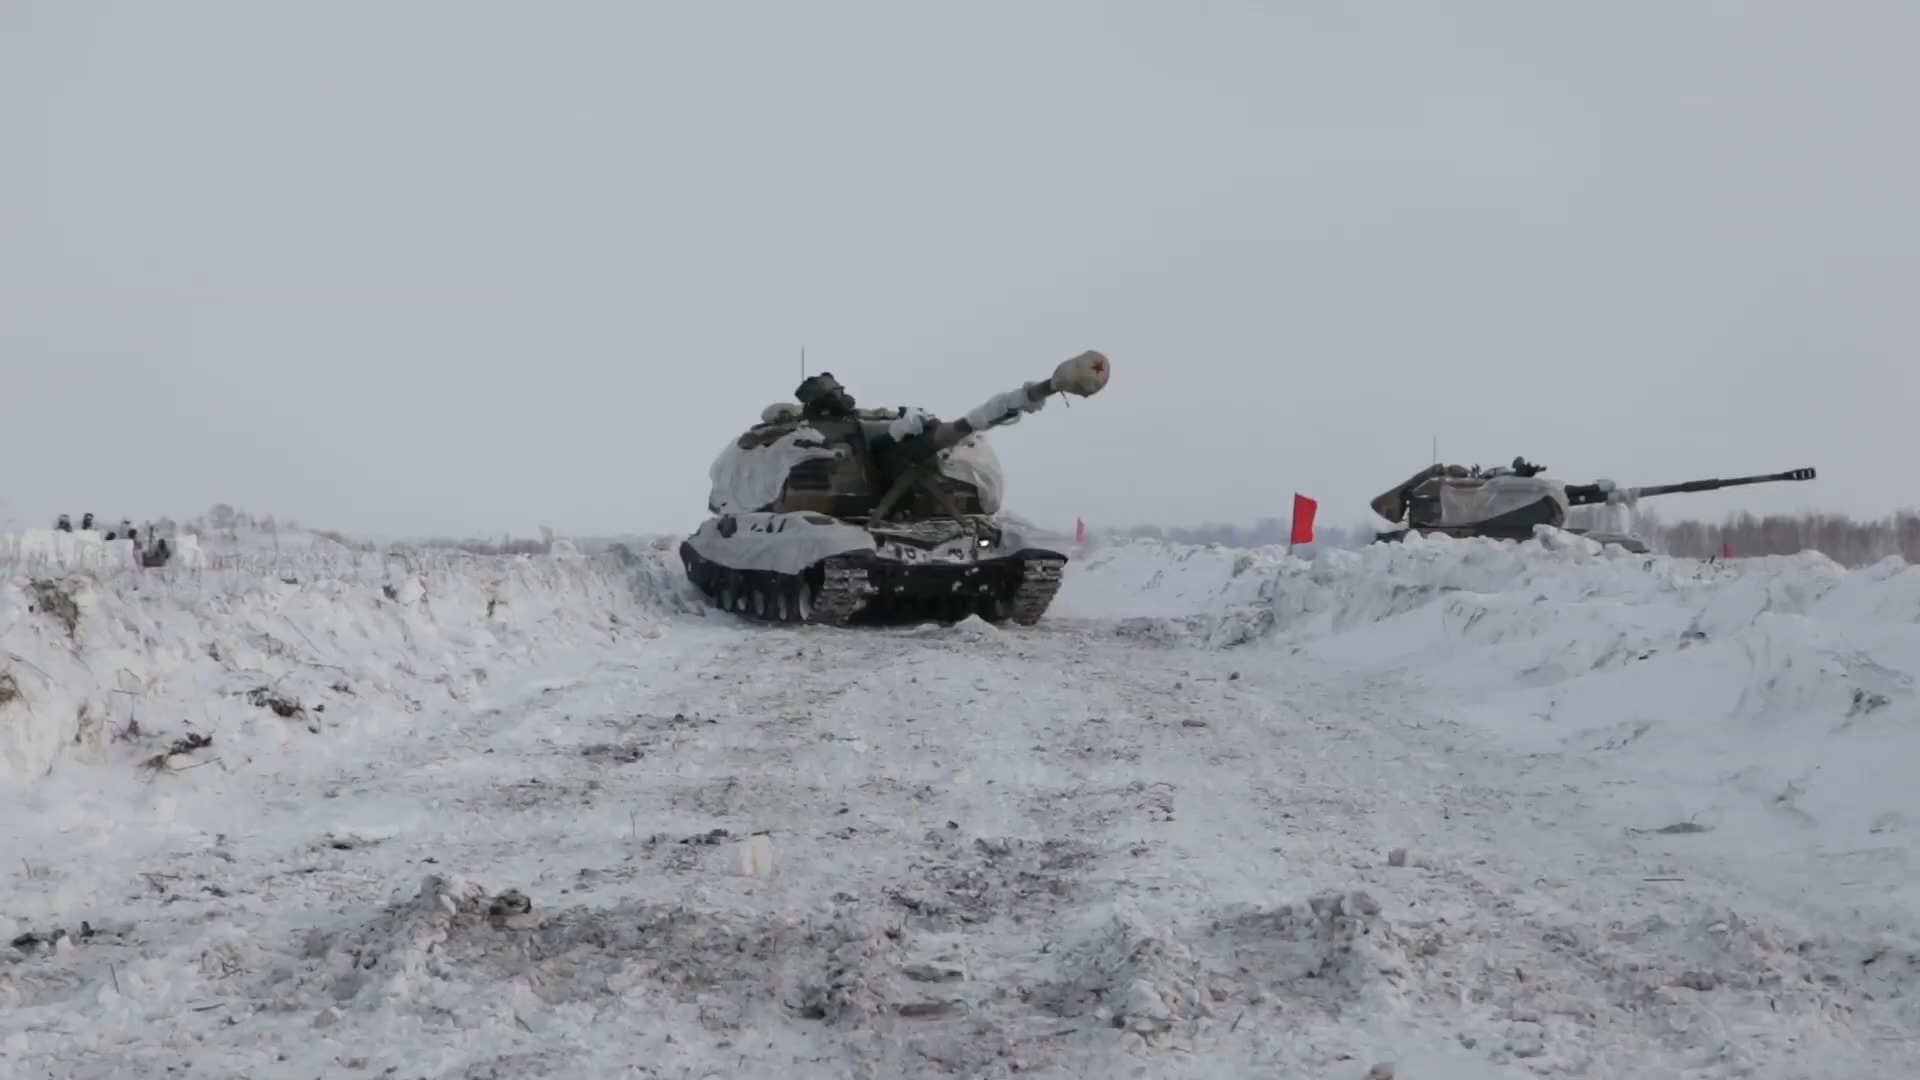 Msta-S Self-Propelled Howitzers Live Fire Exercise in Siberia